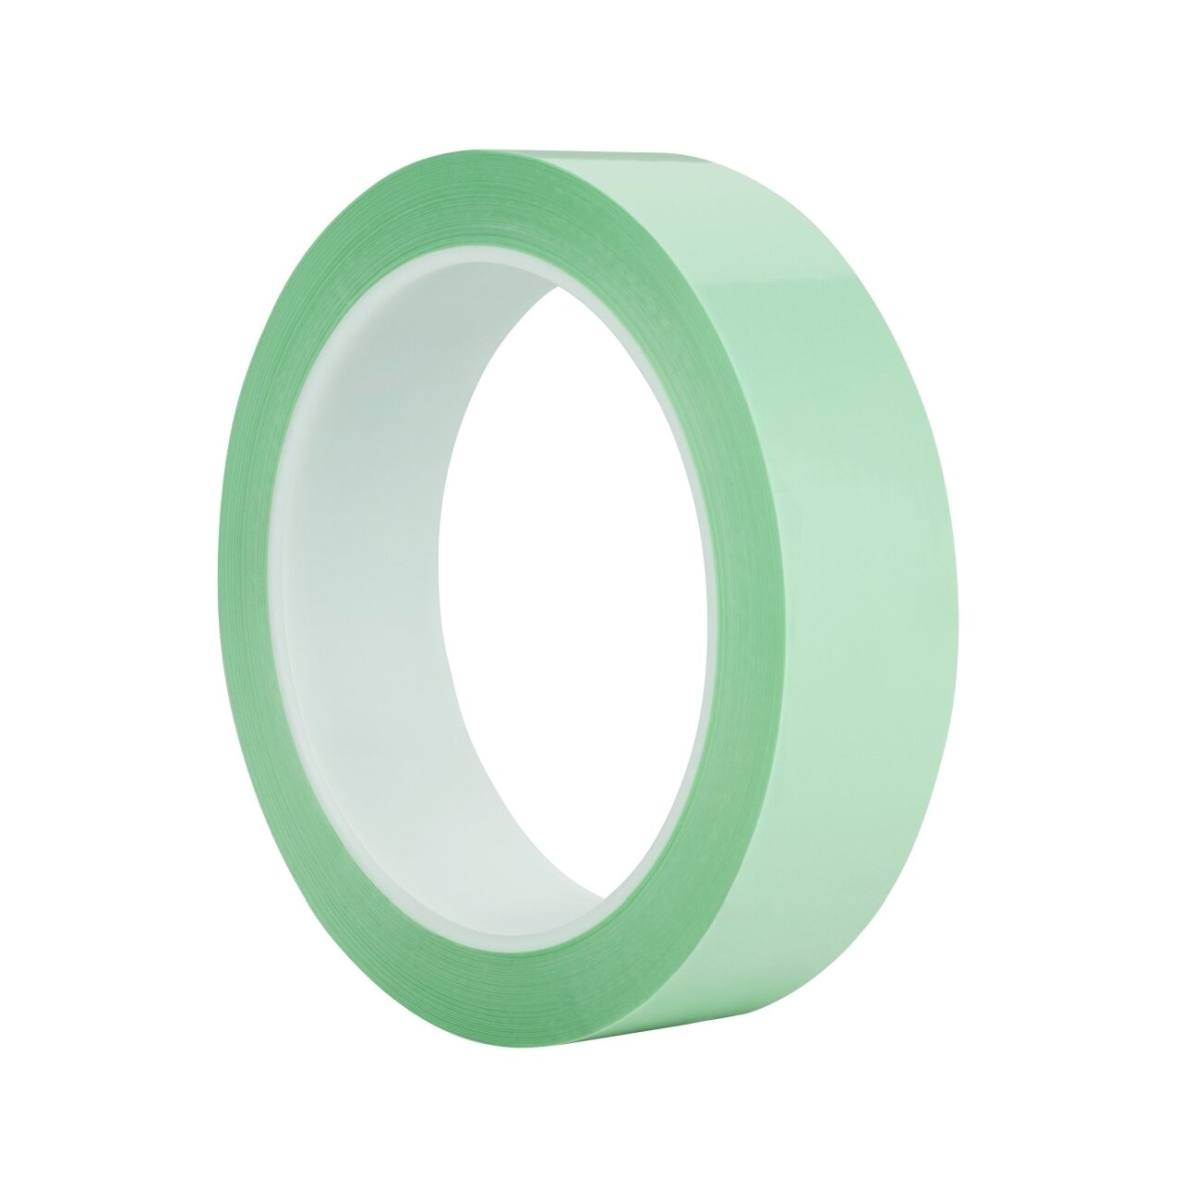 3M polyester adhesive tape 875, green, 1220 mm x 66 m, 0.05 mm